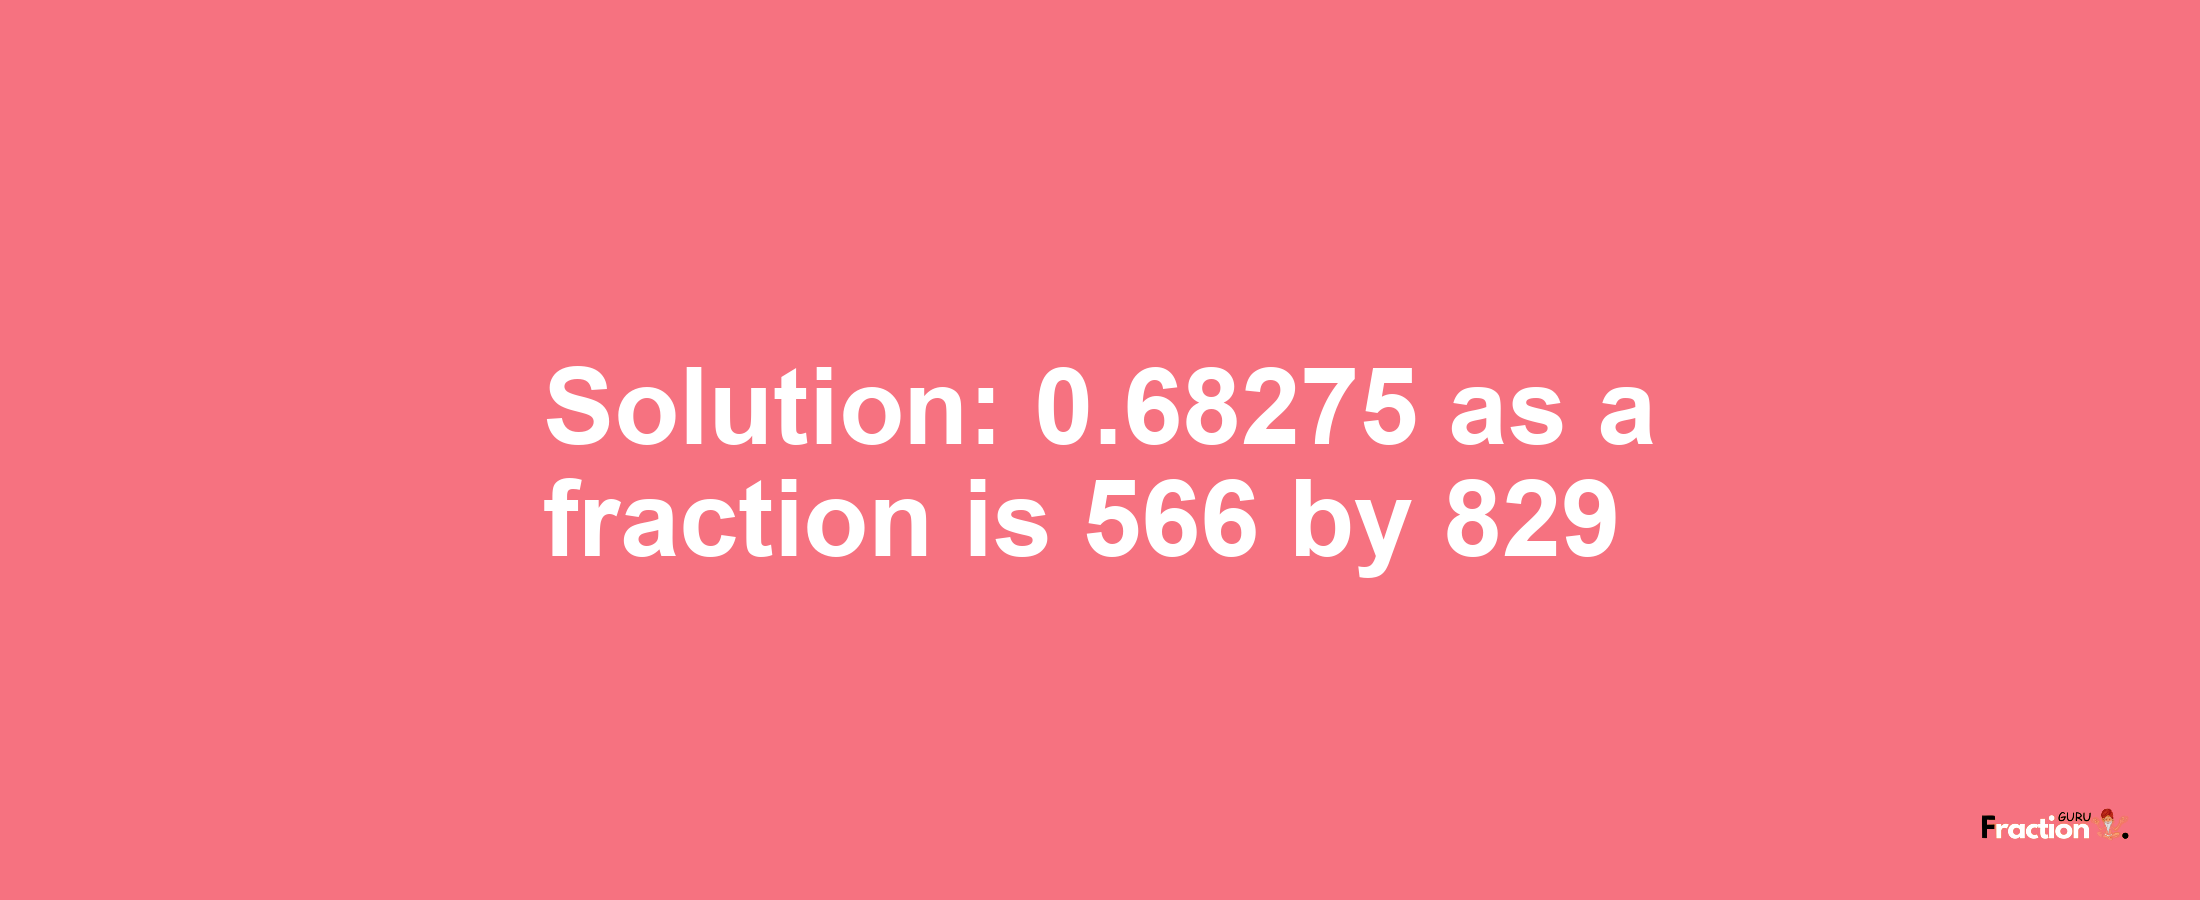 Solution:0.68275 as a fraction is 566/829